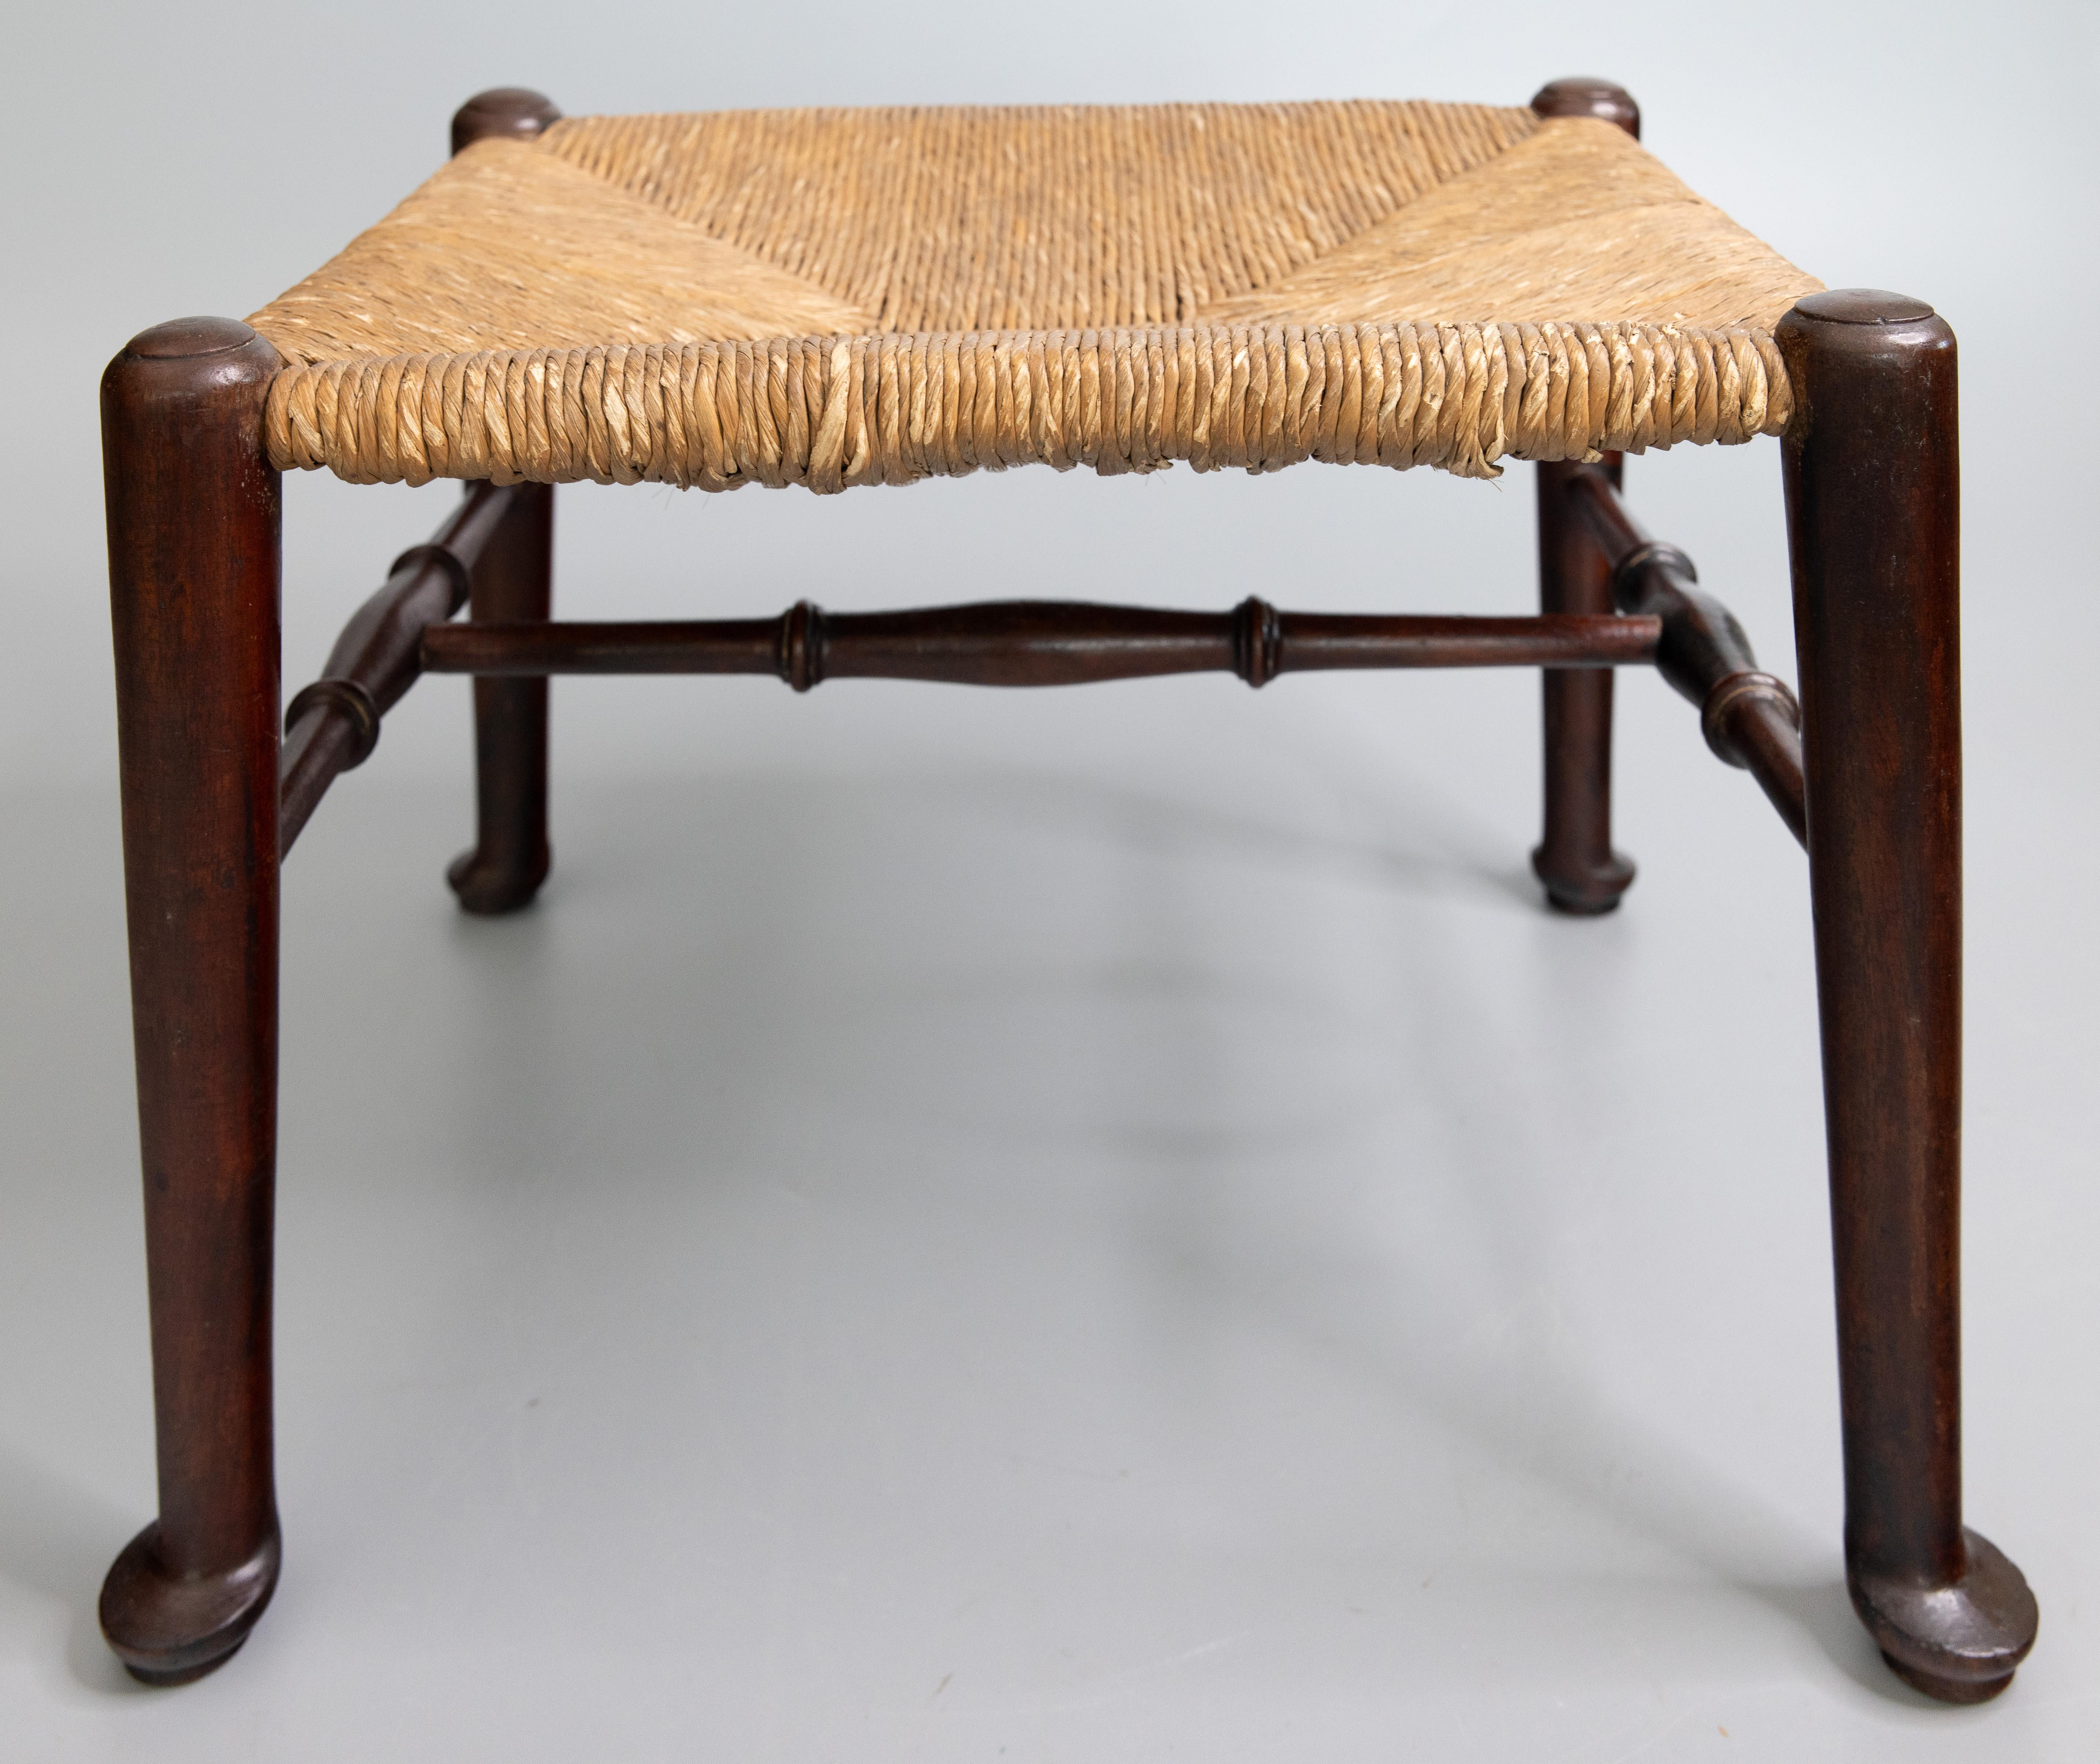 A superb English oak stool / footstool with hand turned legs and stretchers and hand woven rush seat, circa 1910. This charming stool would make a wonderful foot rest.

DIMENSIONS
14.75ʺW × 12.5ʺD × 10.25ʺH